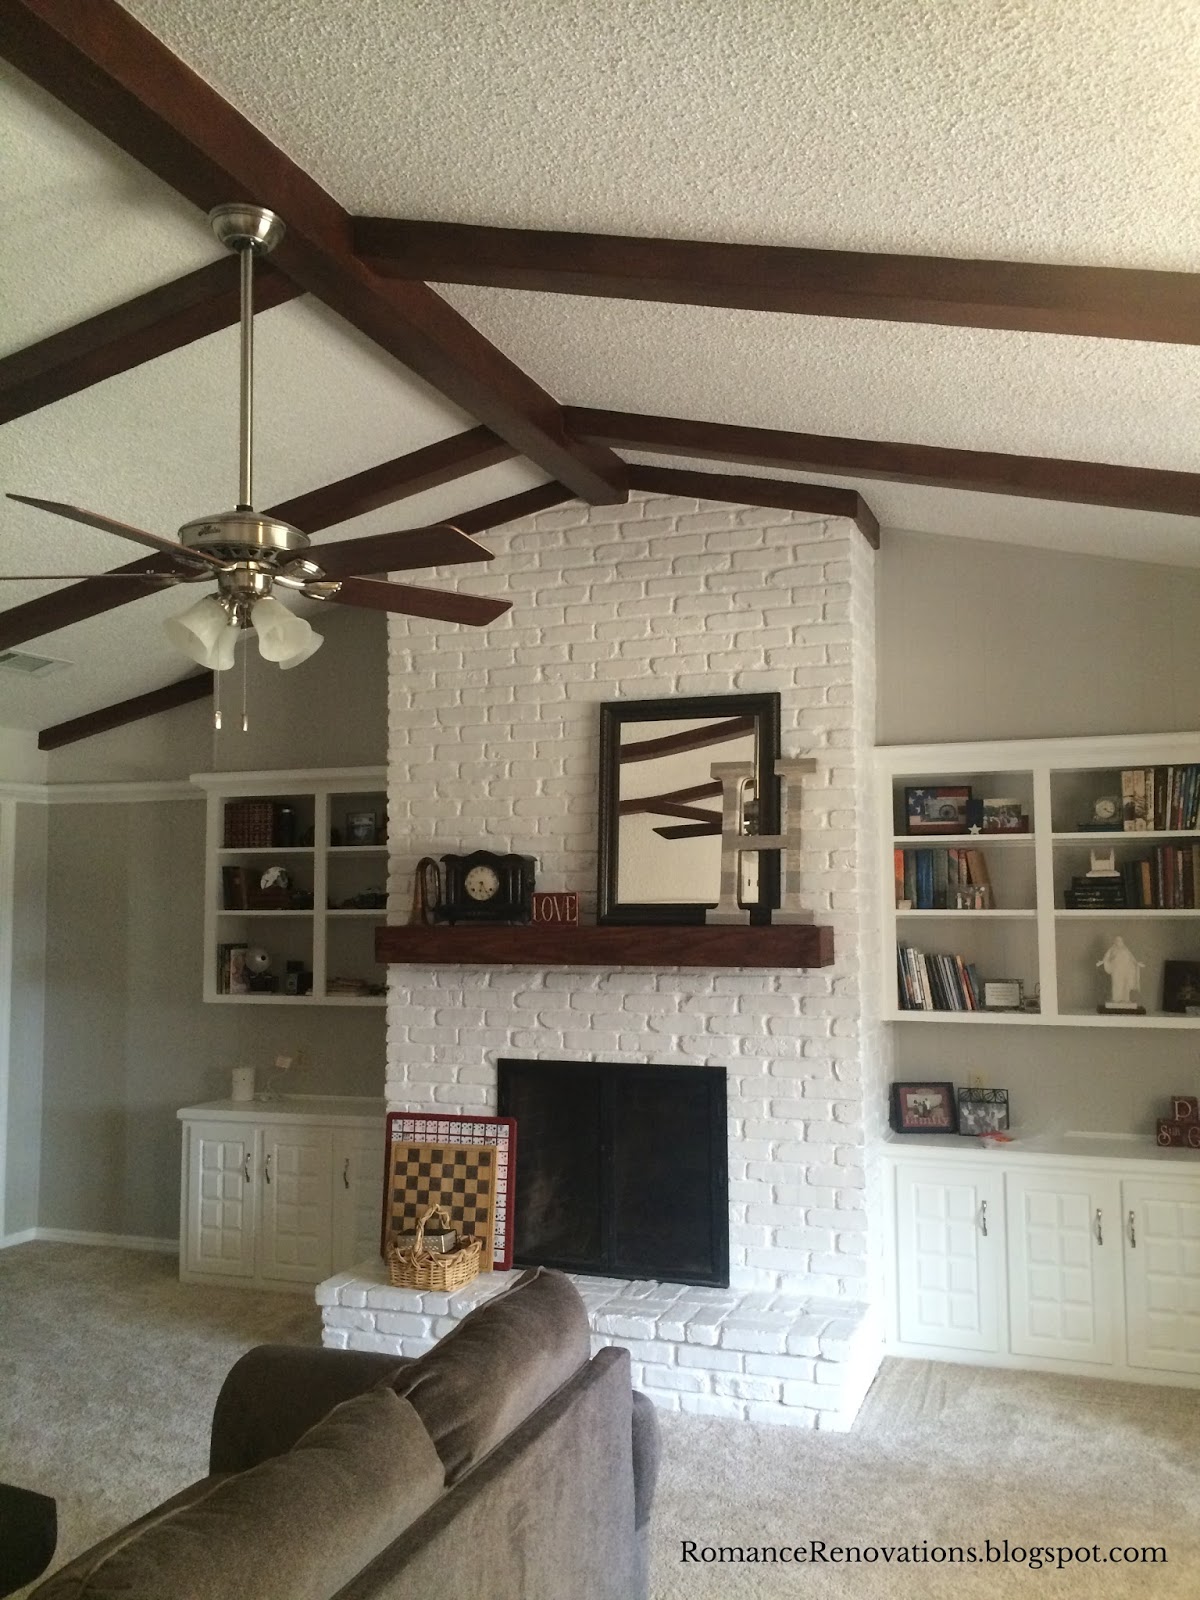 Romance Renovations Painting Ceiling  Beams to Look Like Wood 